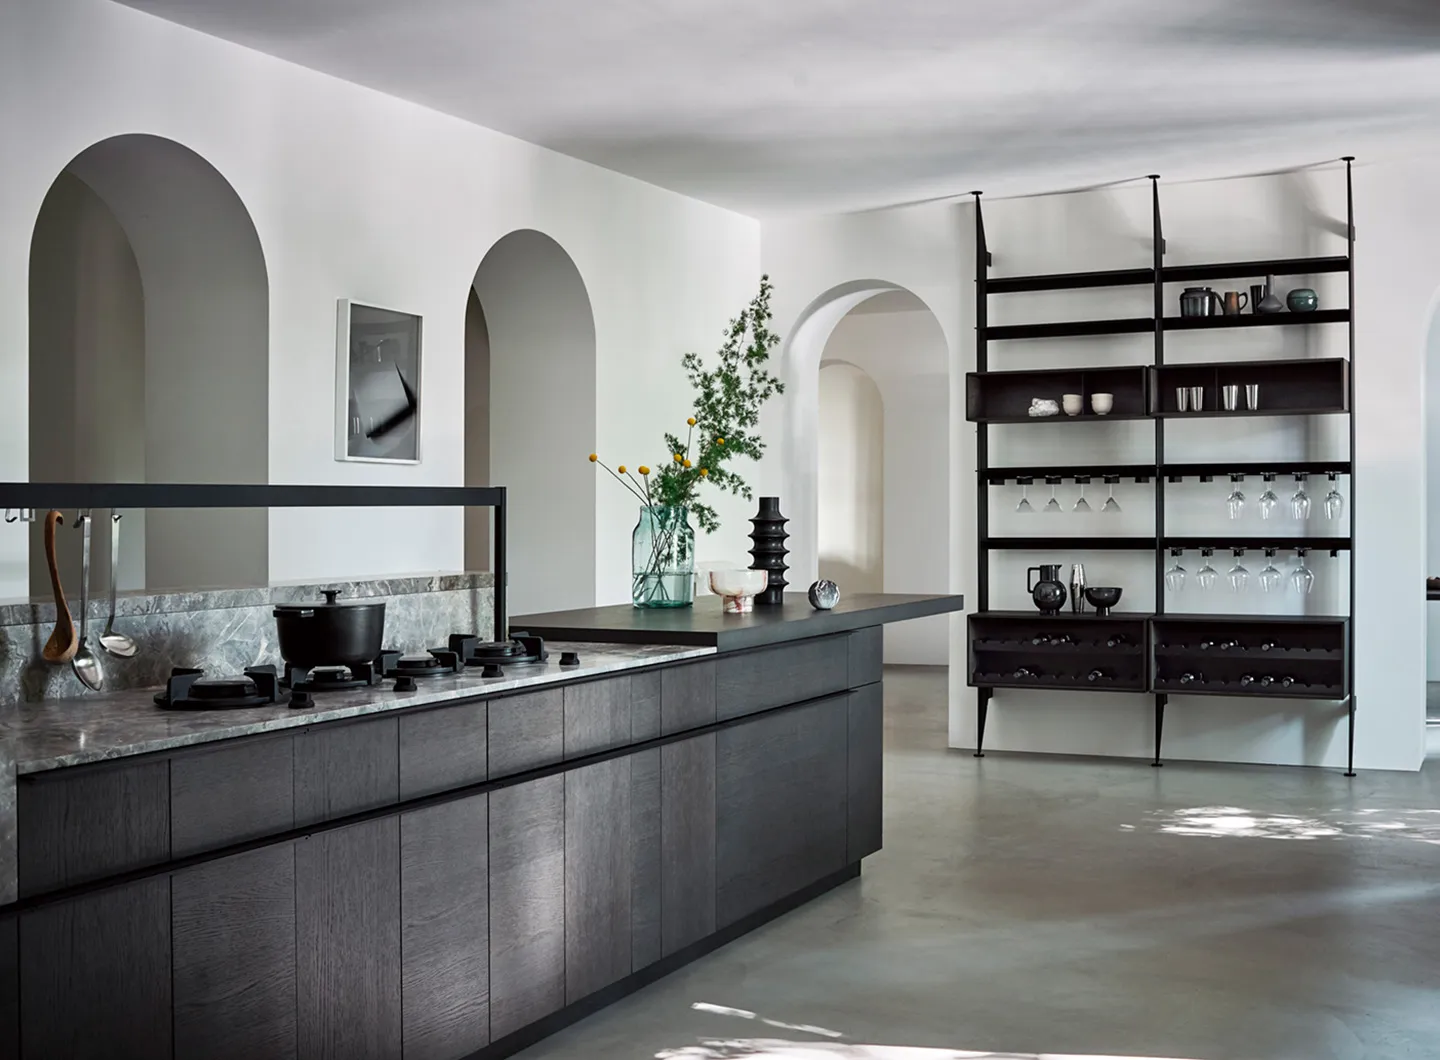 Cesar kitchens - Intarsio in Rovere Fossile